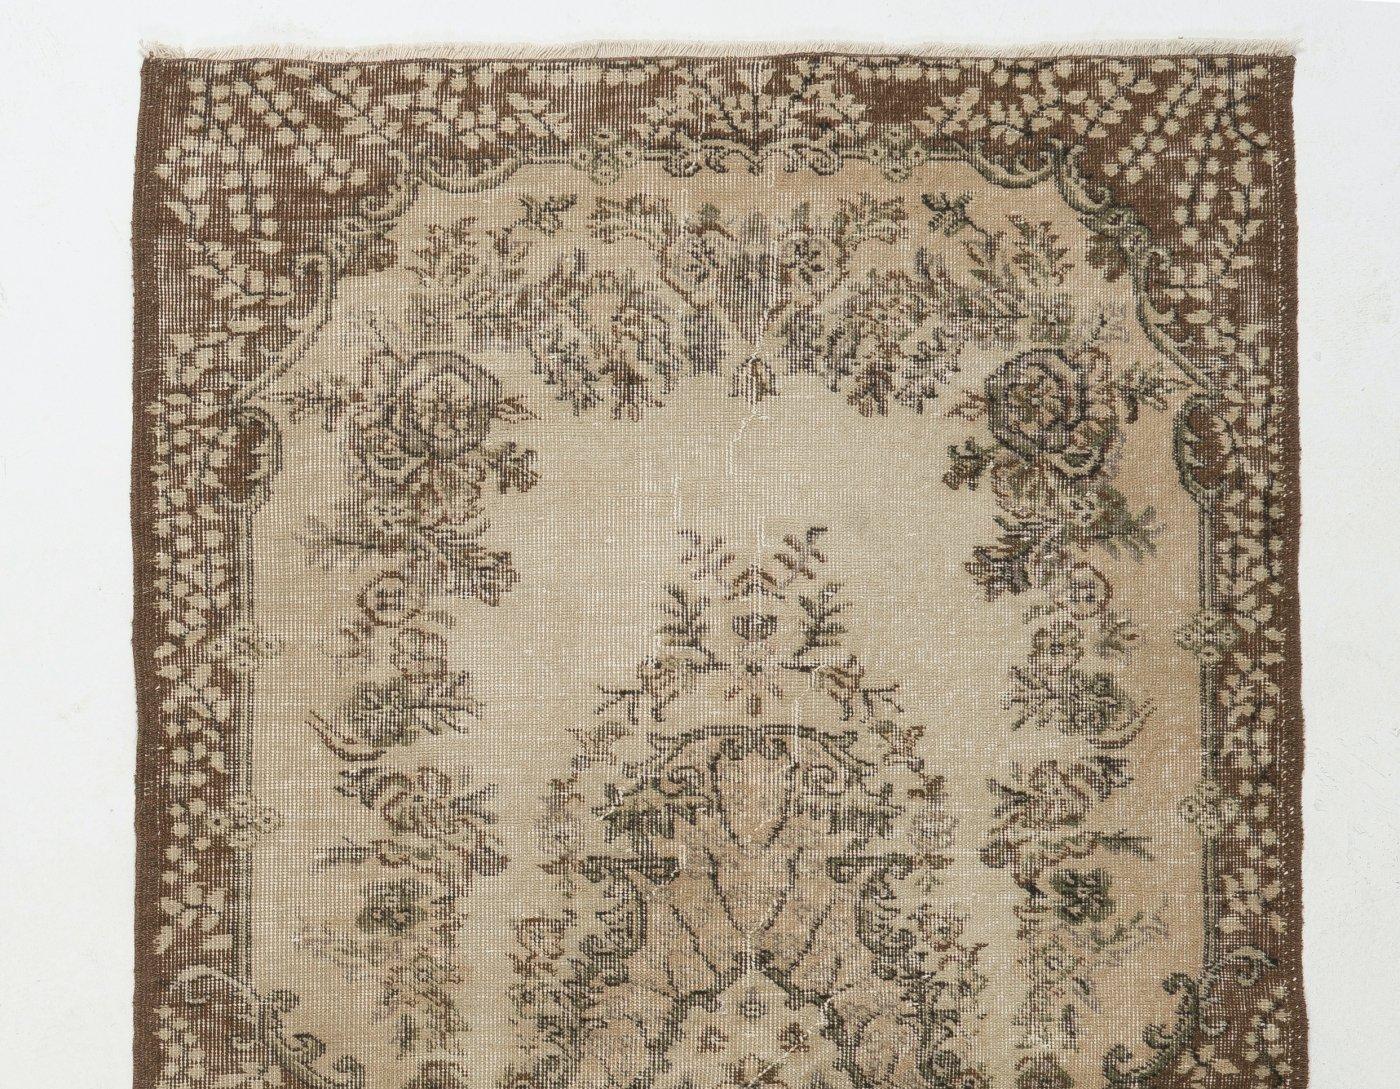 This is a hand-knotted vintage Turkish accent rug. The rug features a floral medallion design in a field decorated with floral motifs. It has low distressed wool pile on cotton foundation, is in very good condition, sturdy and clean as a brand new